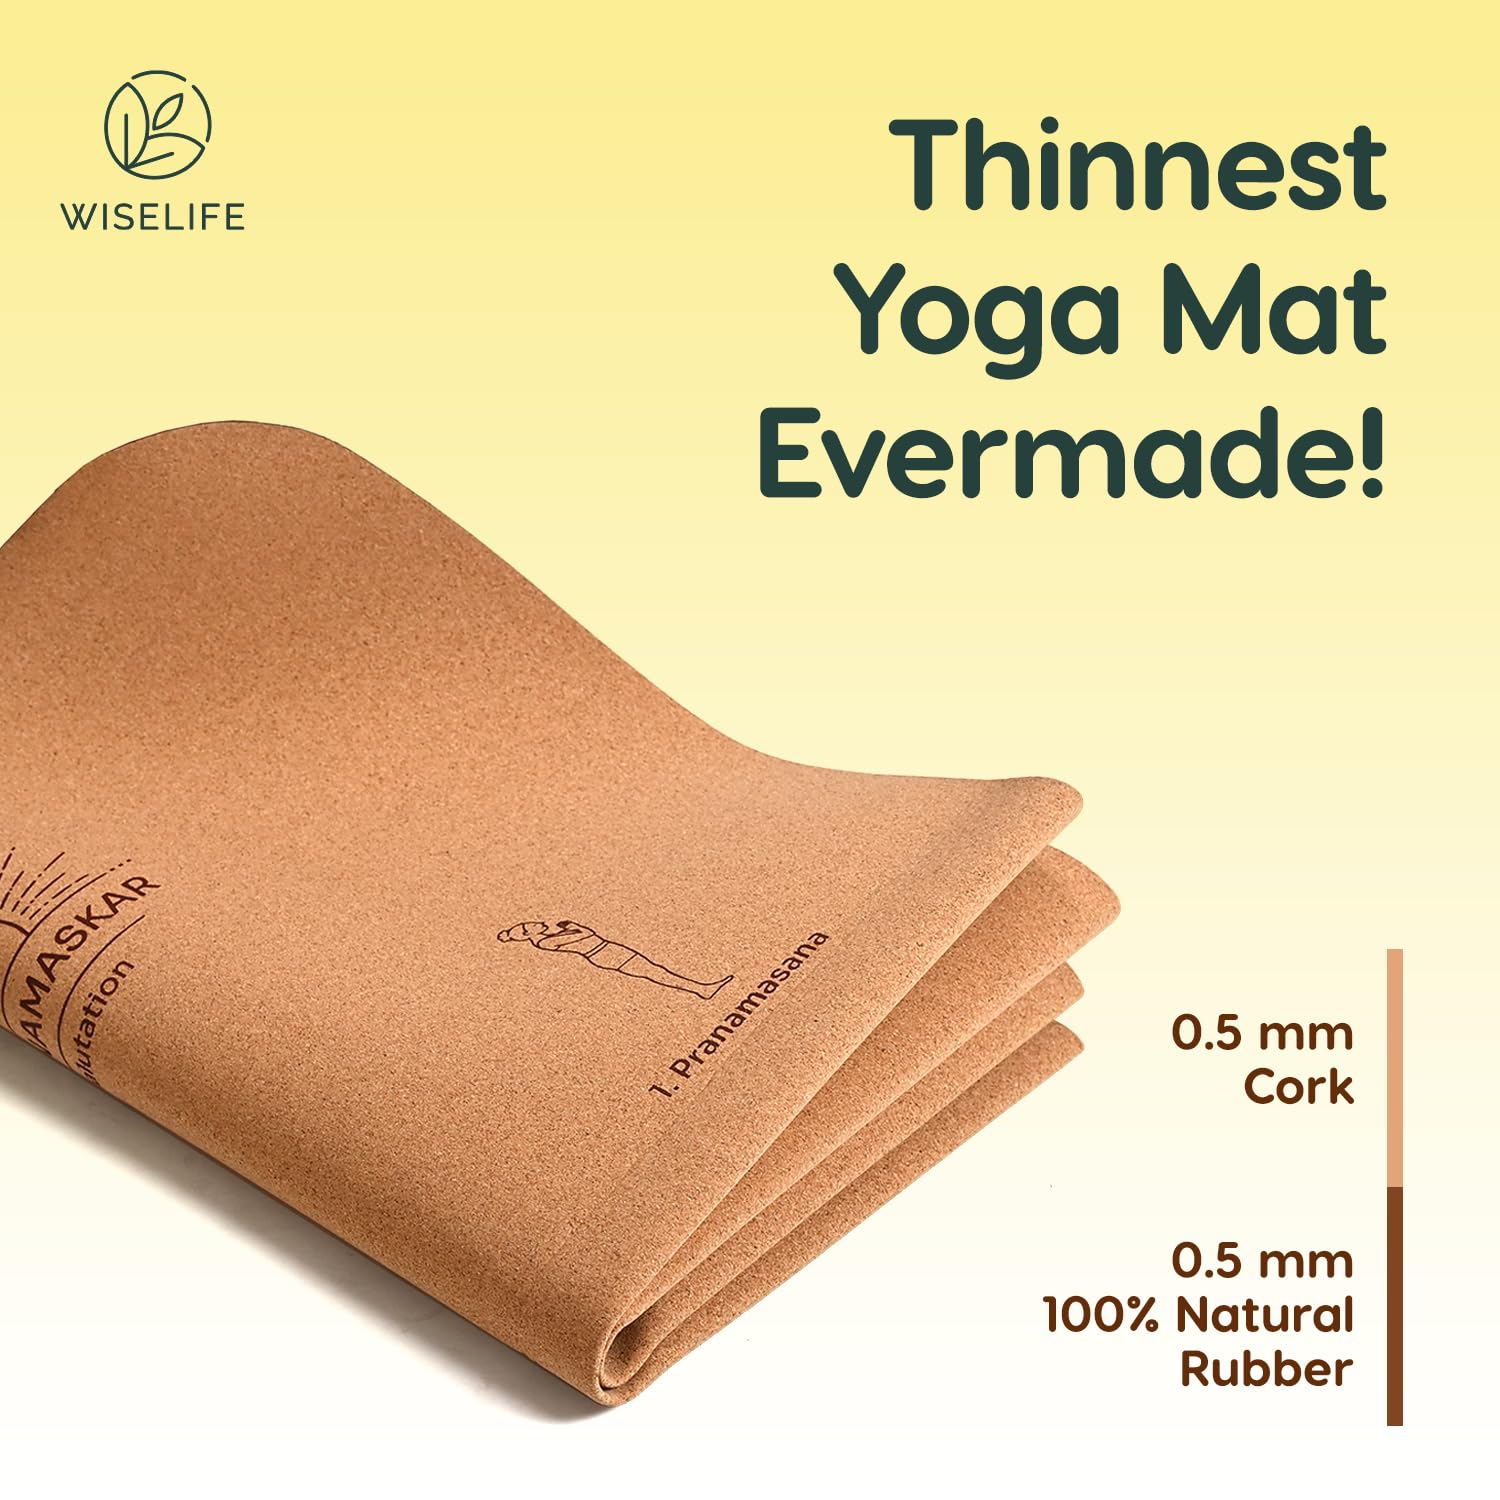 Foldable Cork Yoga Mat: Compact, Lightweight, and Perfect for On-The-Go Yoga  – Yos - The Indian Yoga Shop